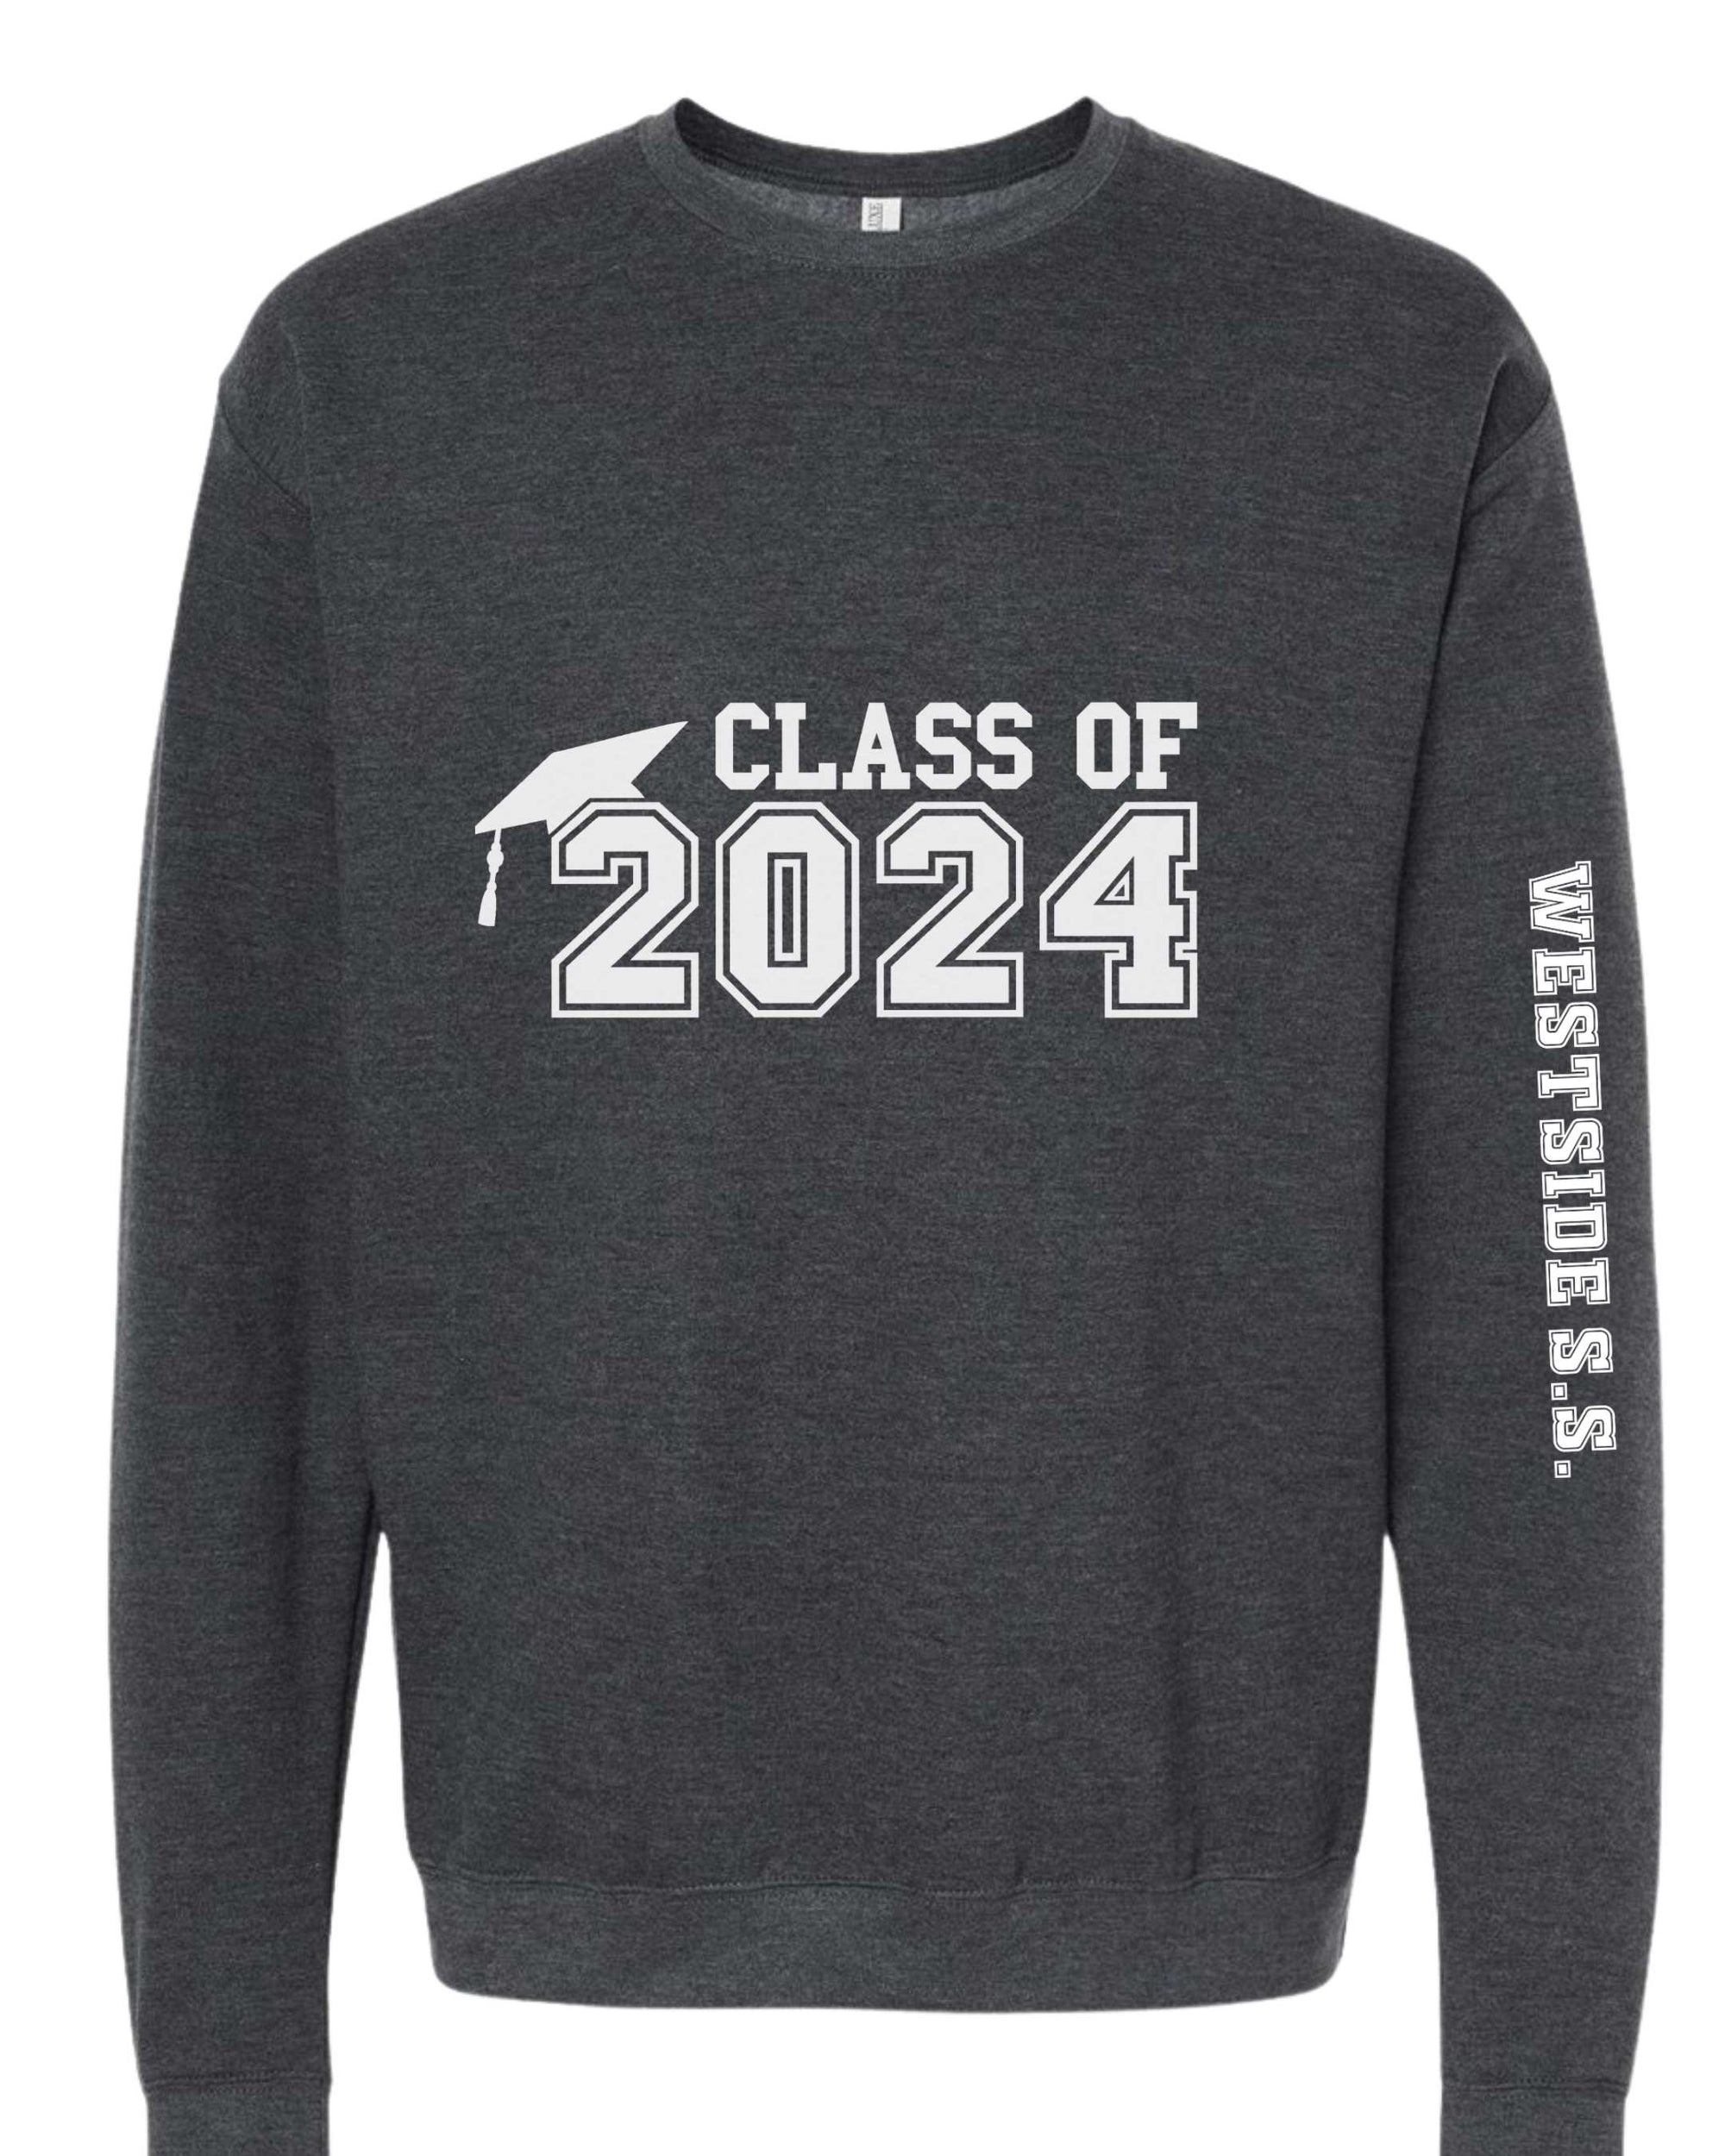 Class of 2024 Crewneck Sweater with Sleeve Details | Adult